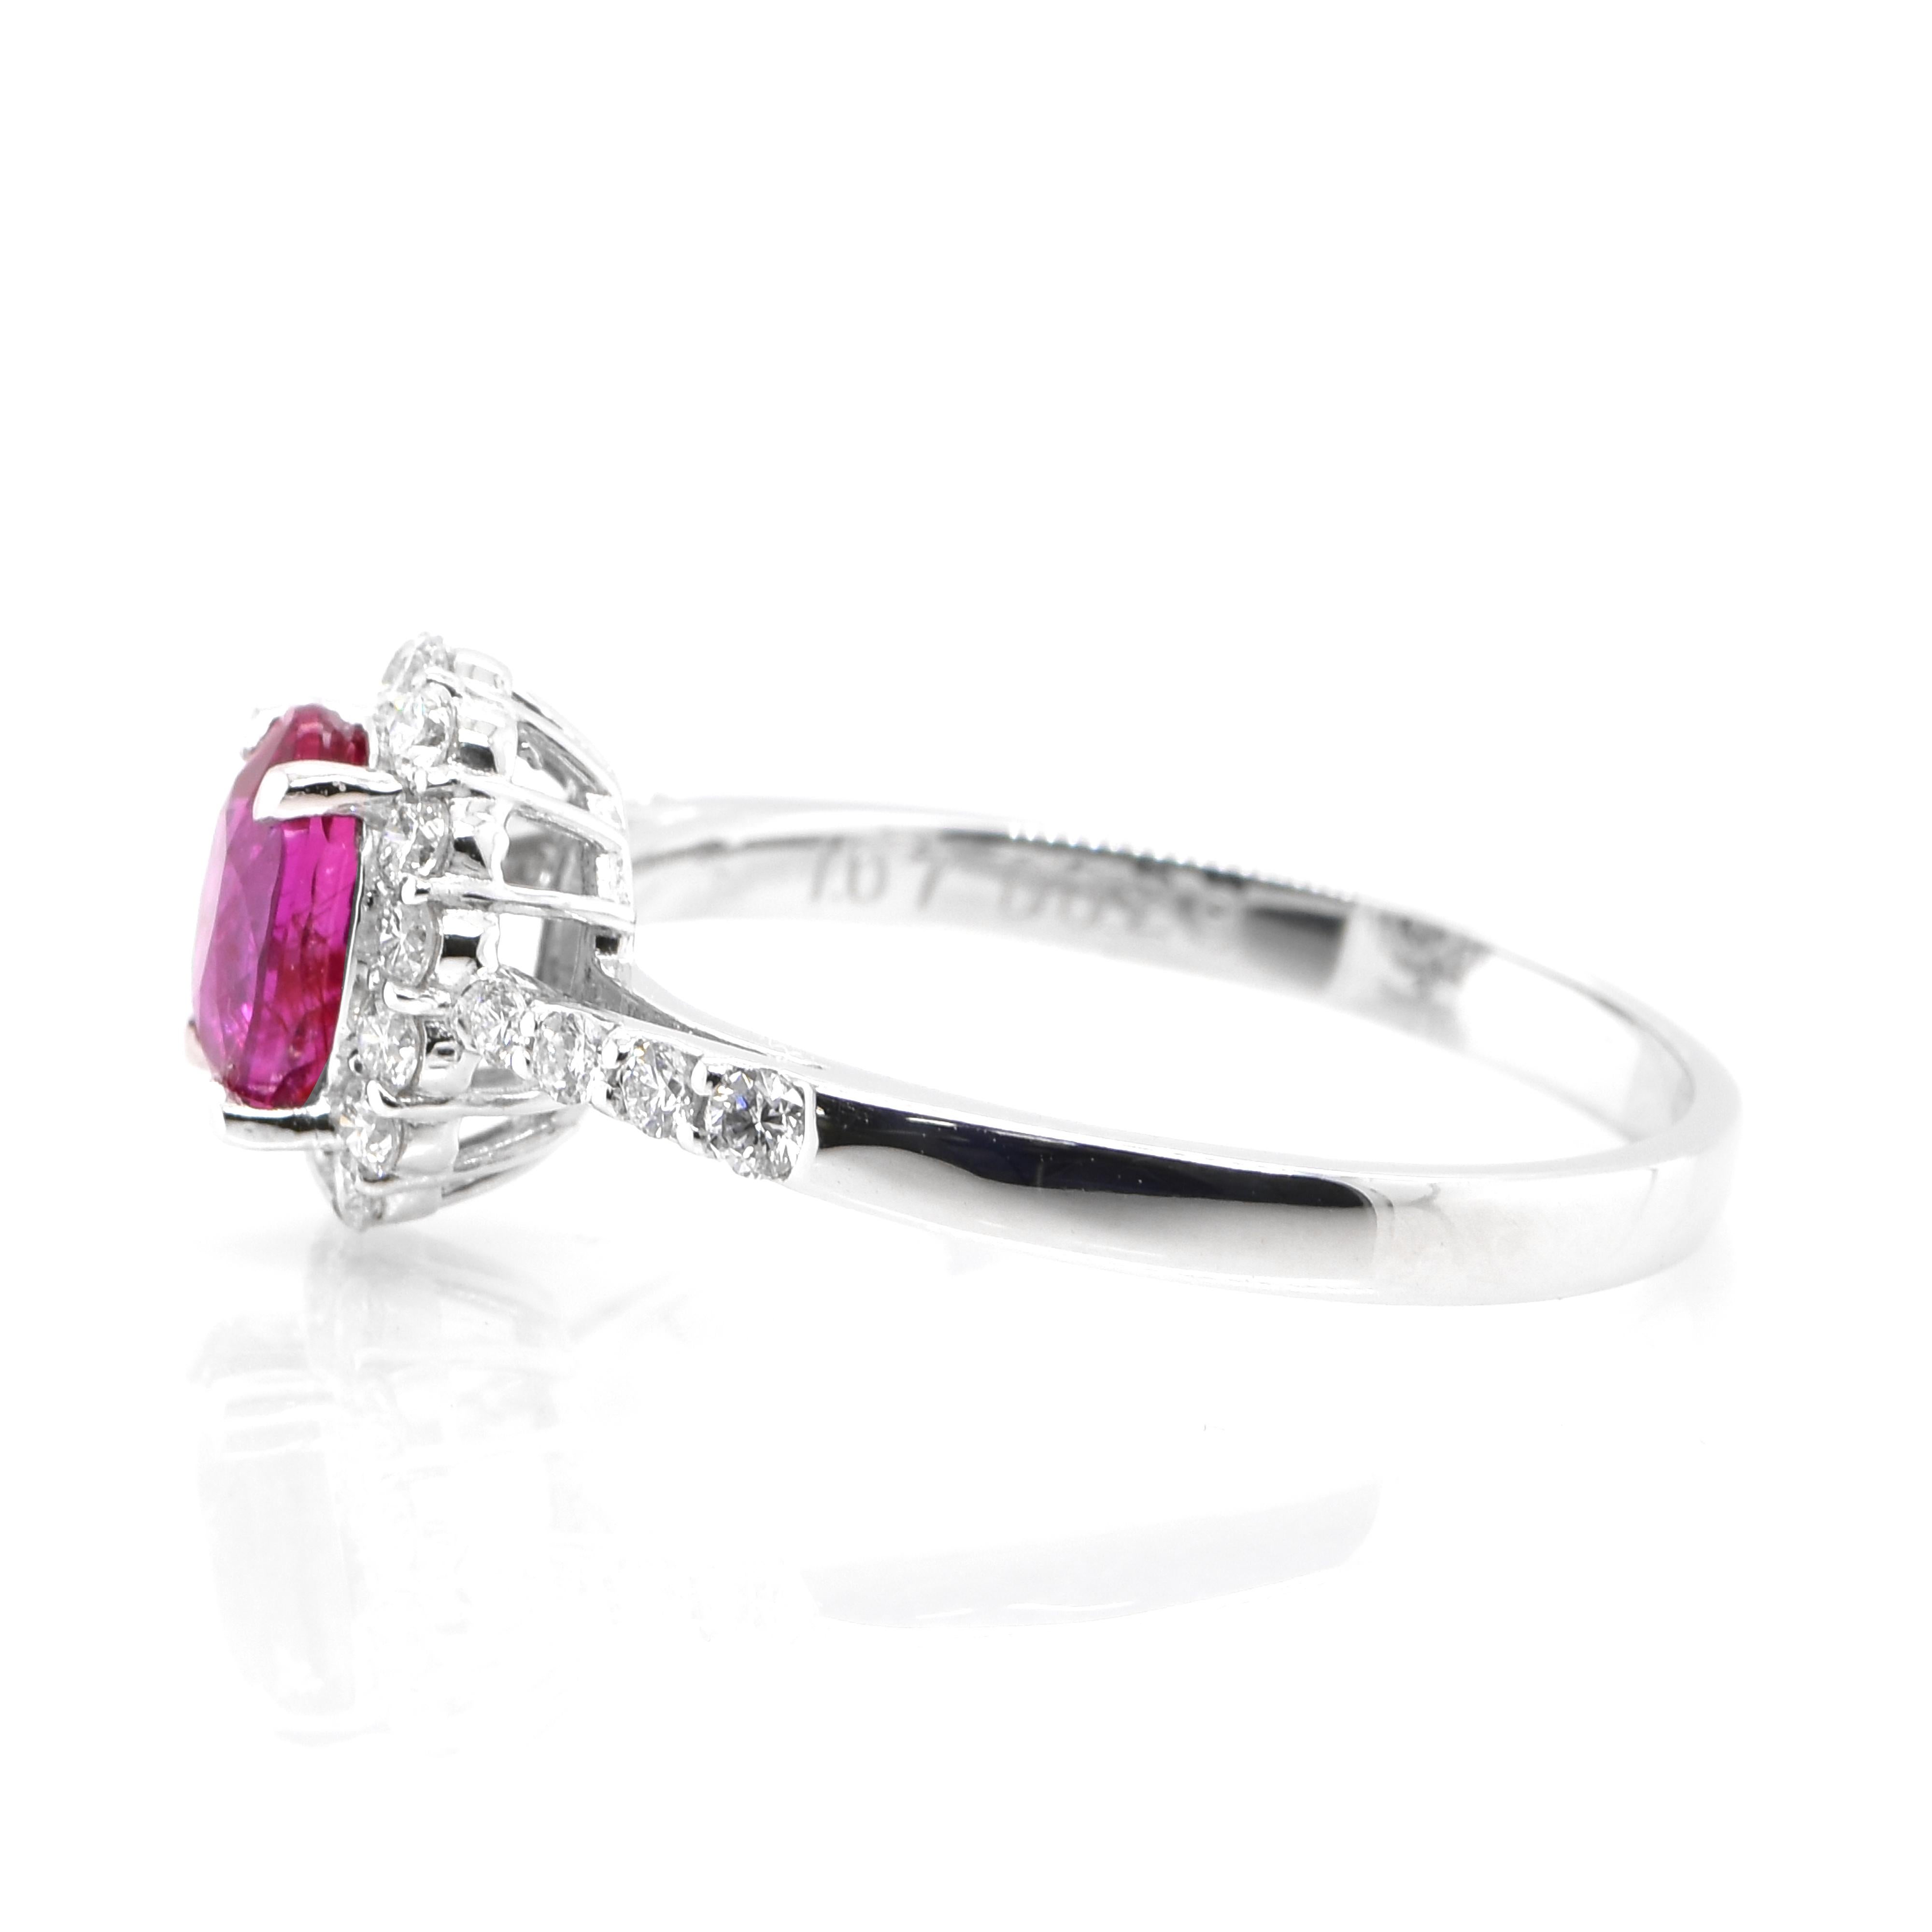 Oval Cut GIA Certified 1.07 Carat Untreated Ruby & Diamond Cocktail Ring Made in Platinum For Sale